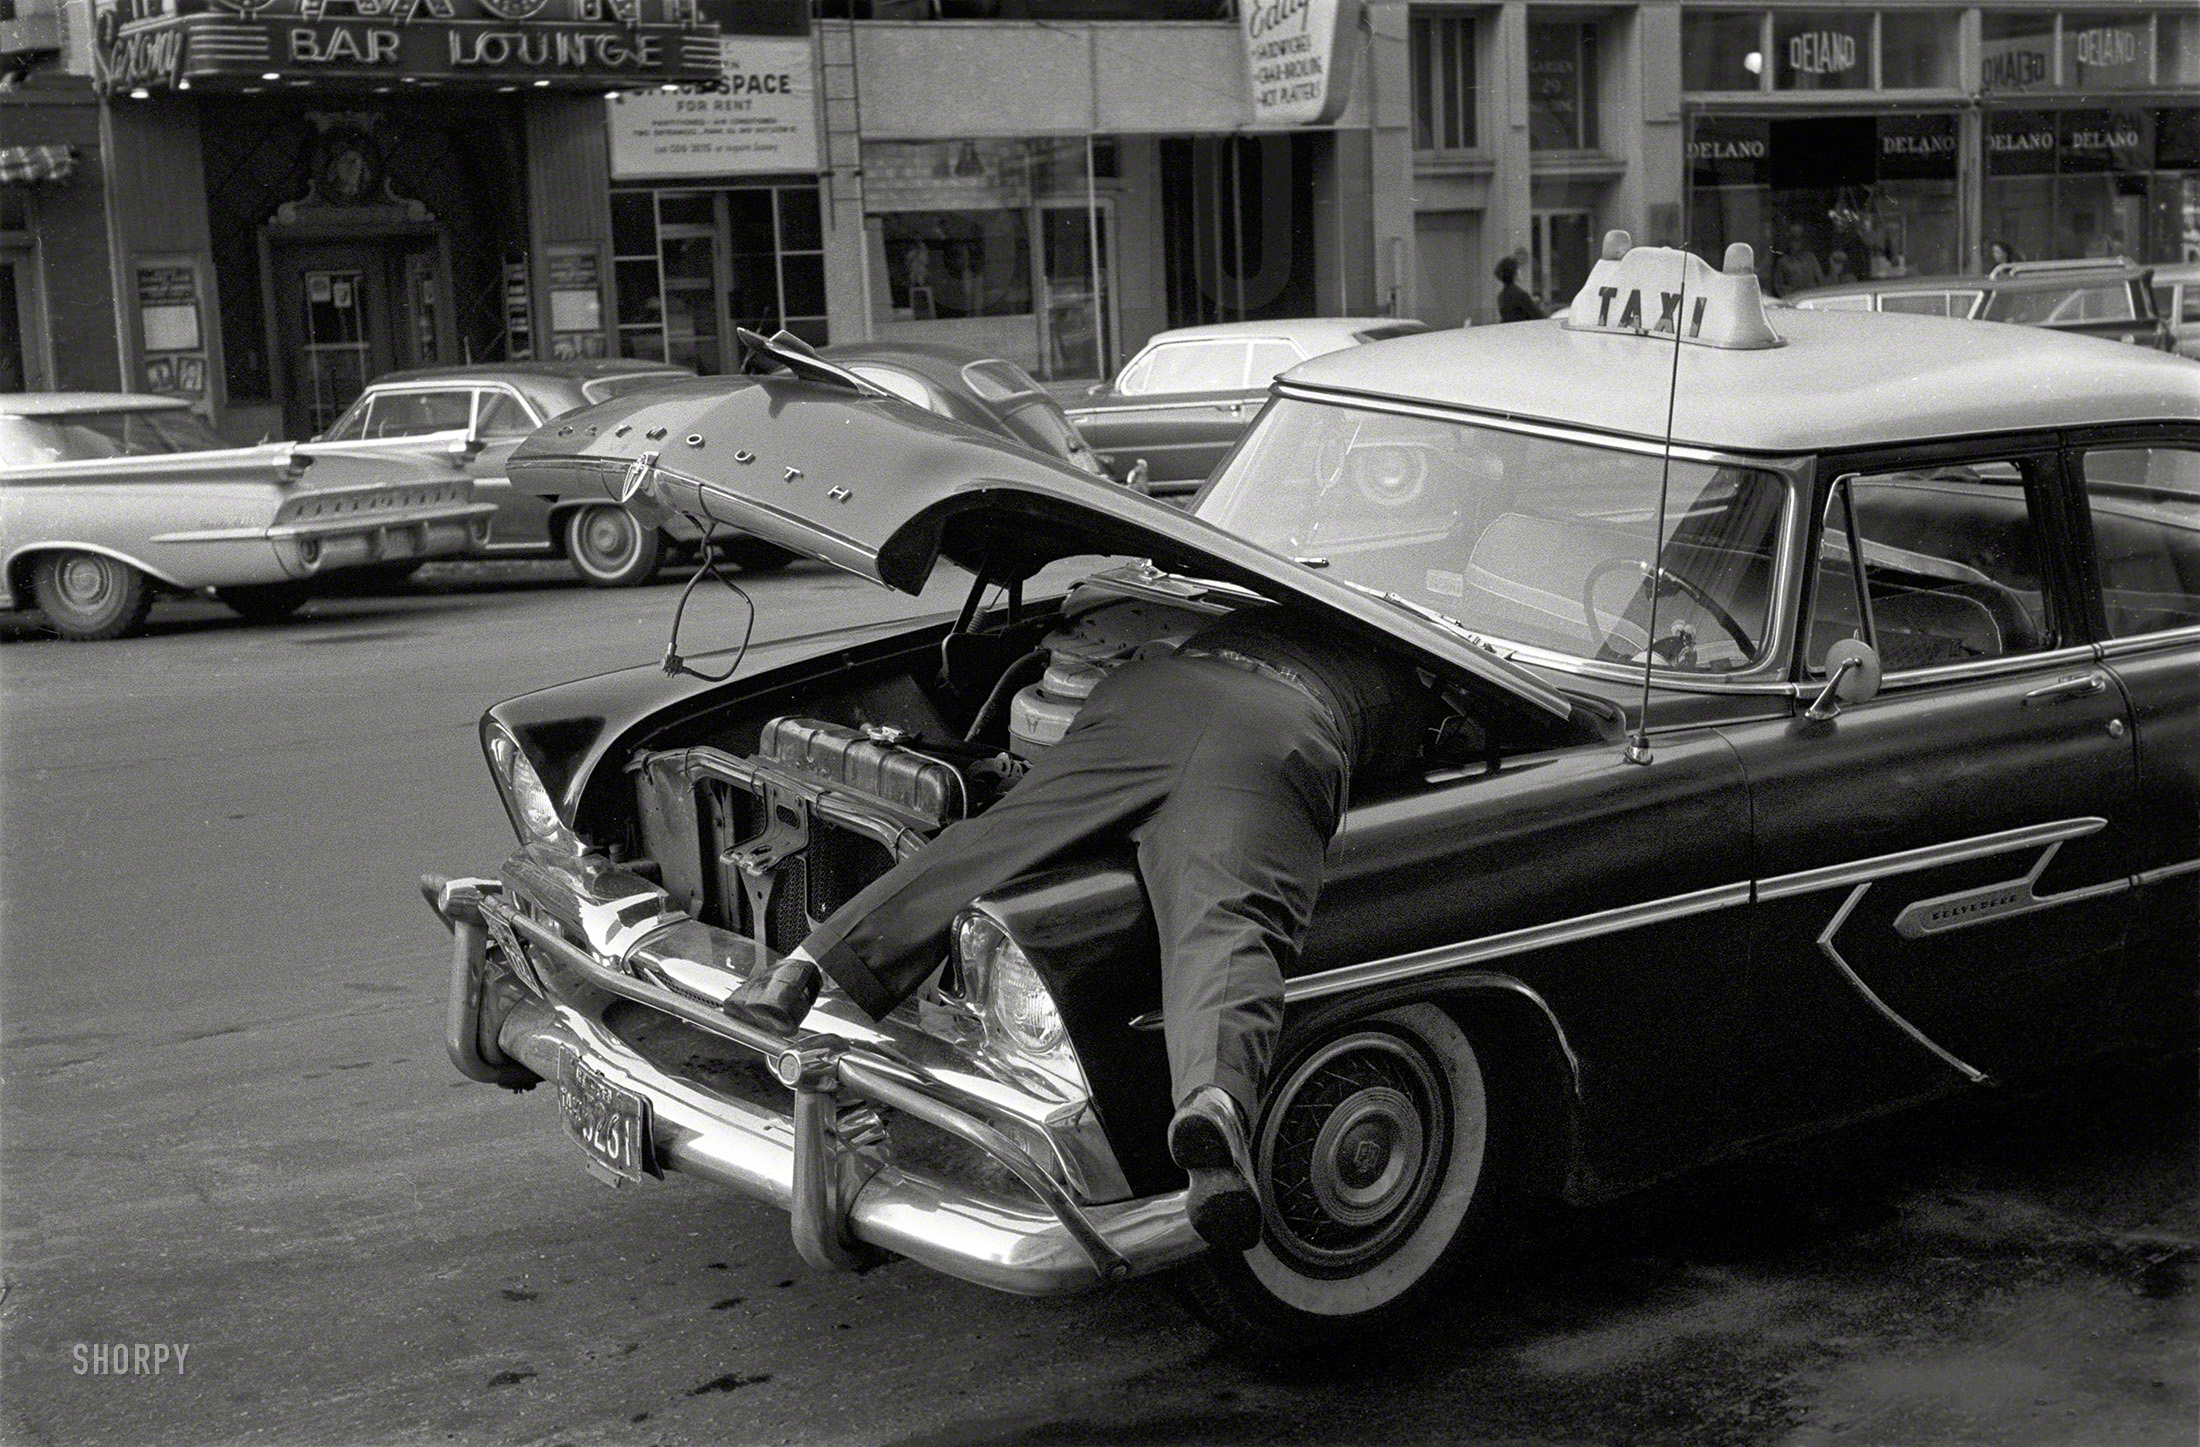 1963. "Cab driver and taxi at Saxony Bar & Lounge, Boston." 35mm negative, photographer unknown. Another eBay find scanned by Shorpy. View full size.